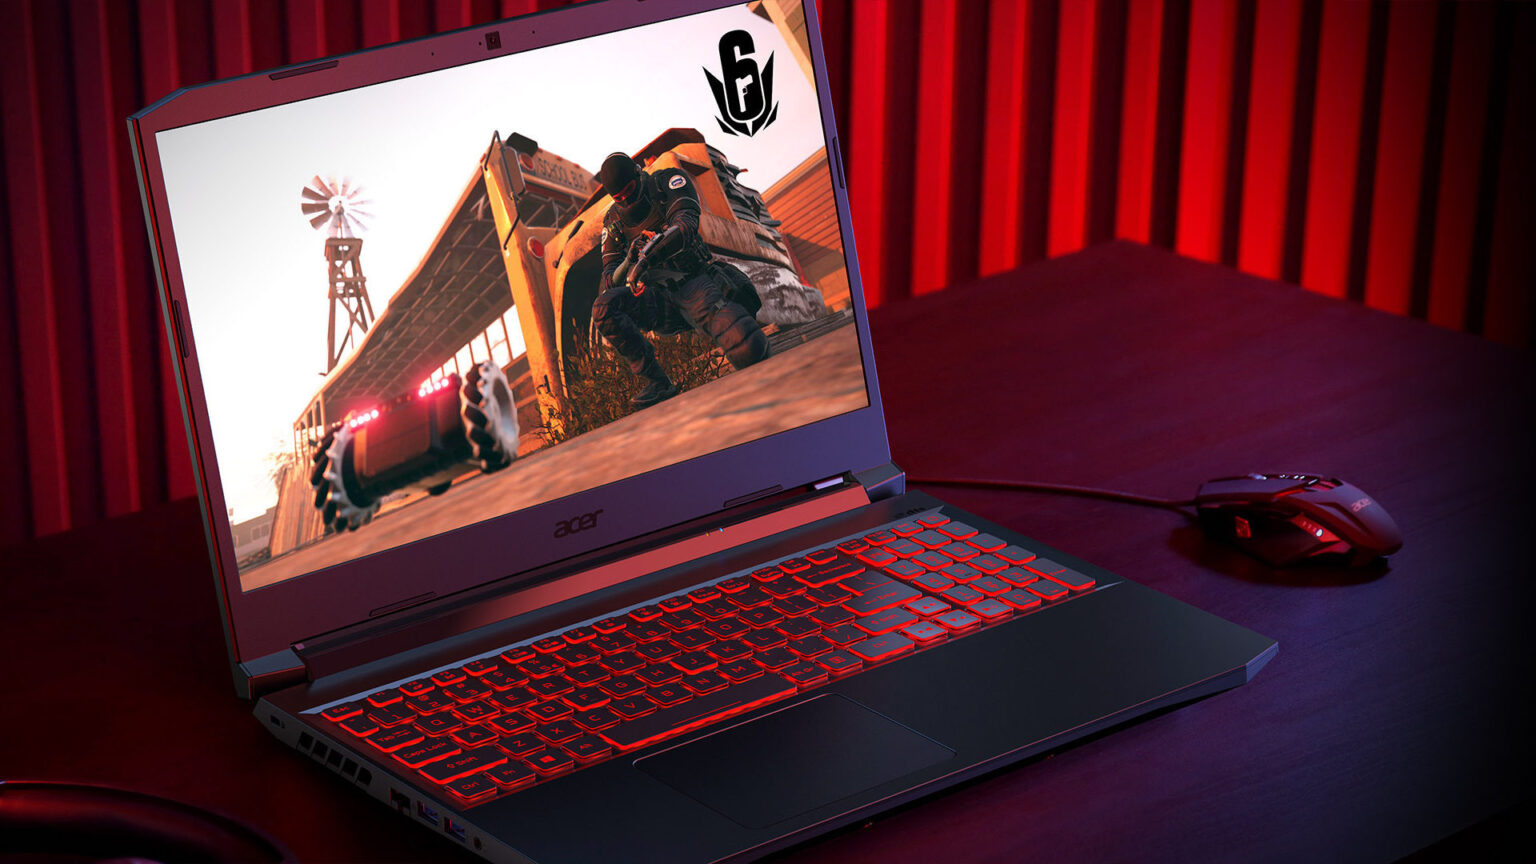 There’s no better feeling than getting your hands on a new gaming laptop. Here are all the tips you need to know before buying.